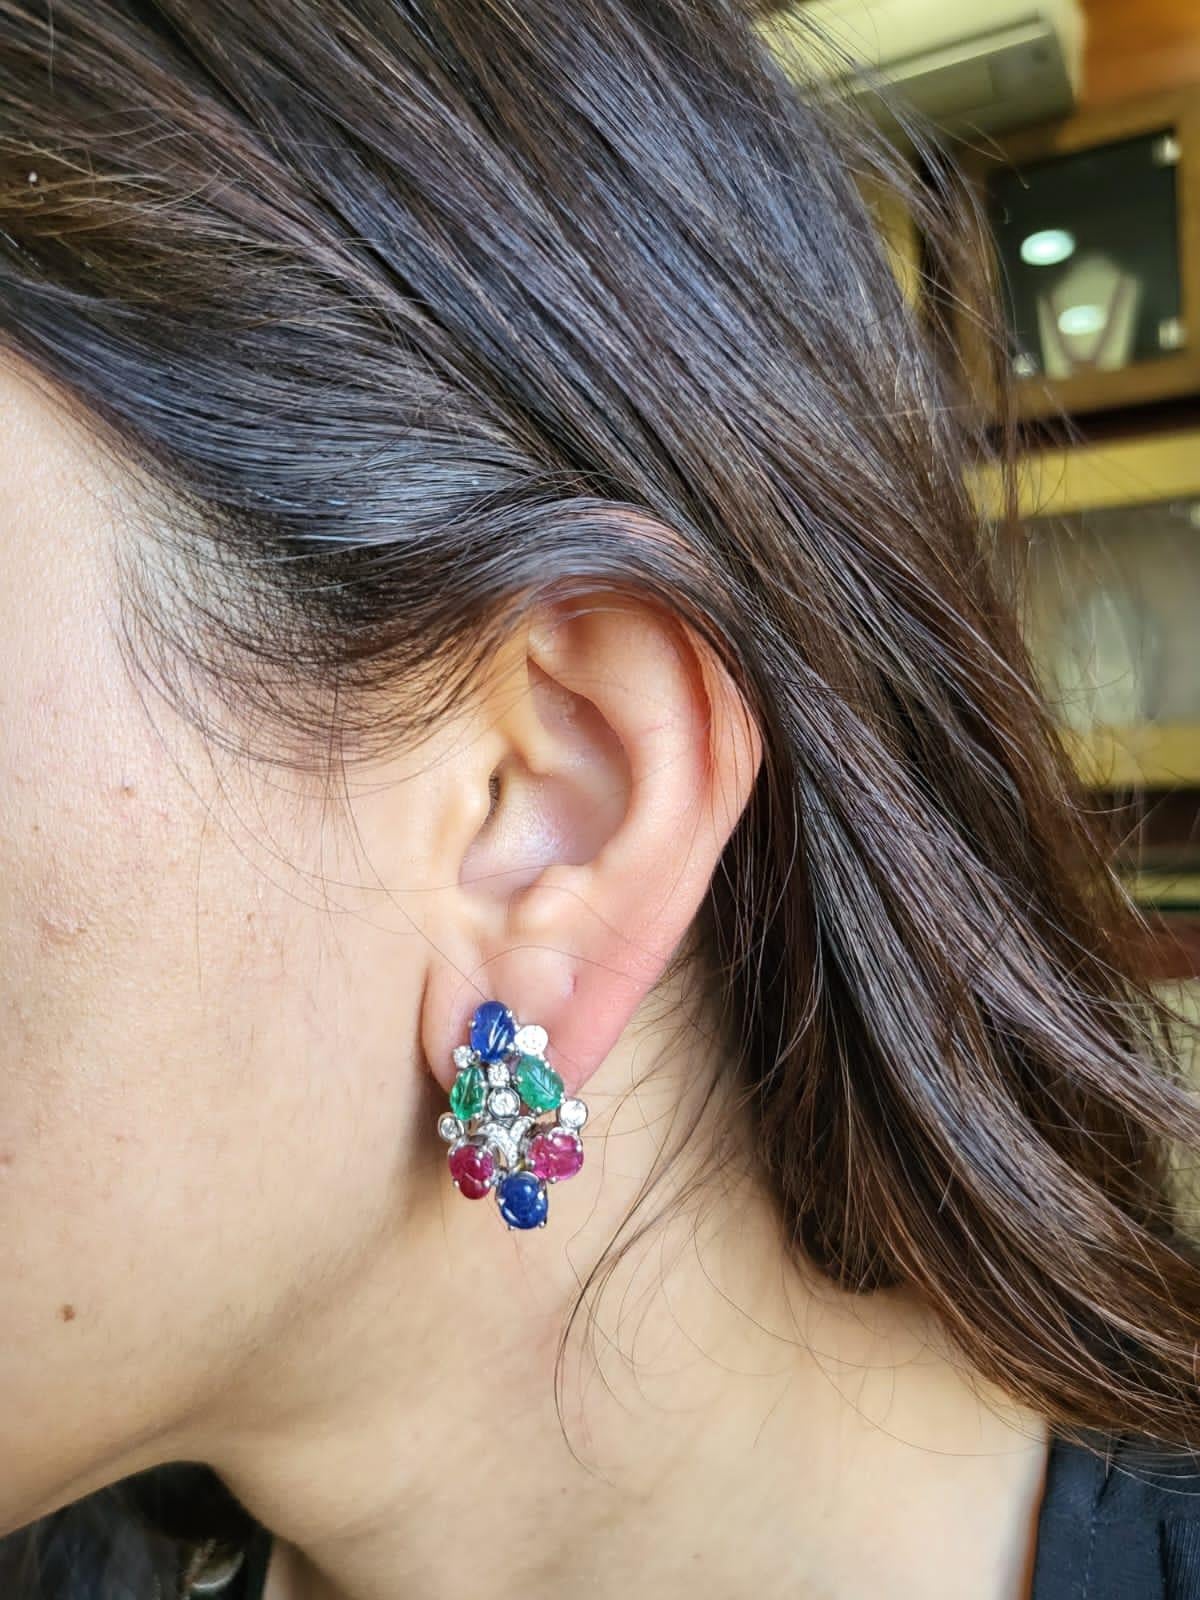 A very cute and dainty pair of Tutti - Frutti Earrings set in 18K White Gold with Blue Sapphire, Emerald & Ruby & Diamonds. The weight of the coloured stones is 6.64 carats. The Blue Sapphire, Emerald & Ruby are completely natural, without any